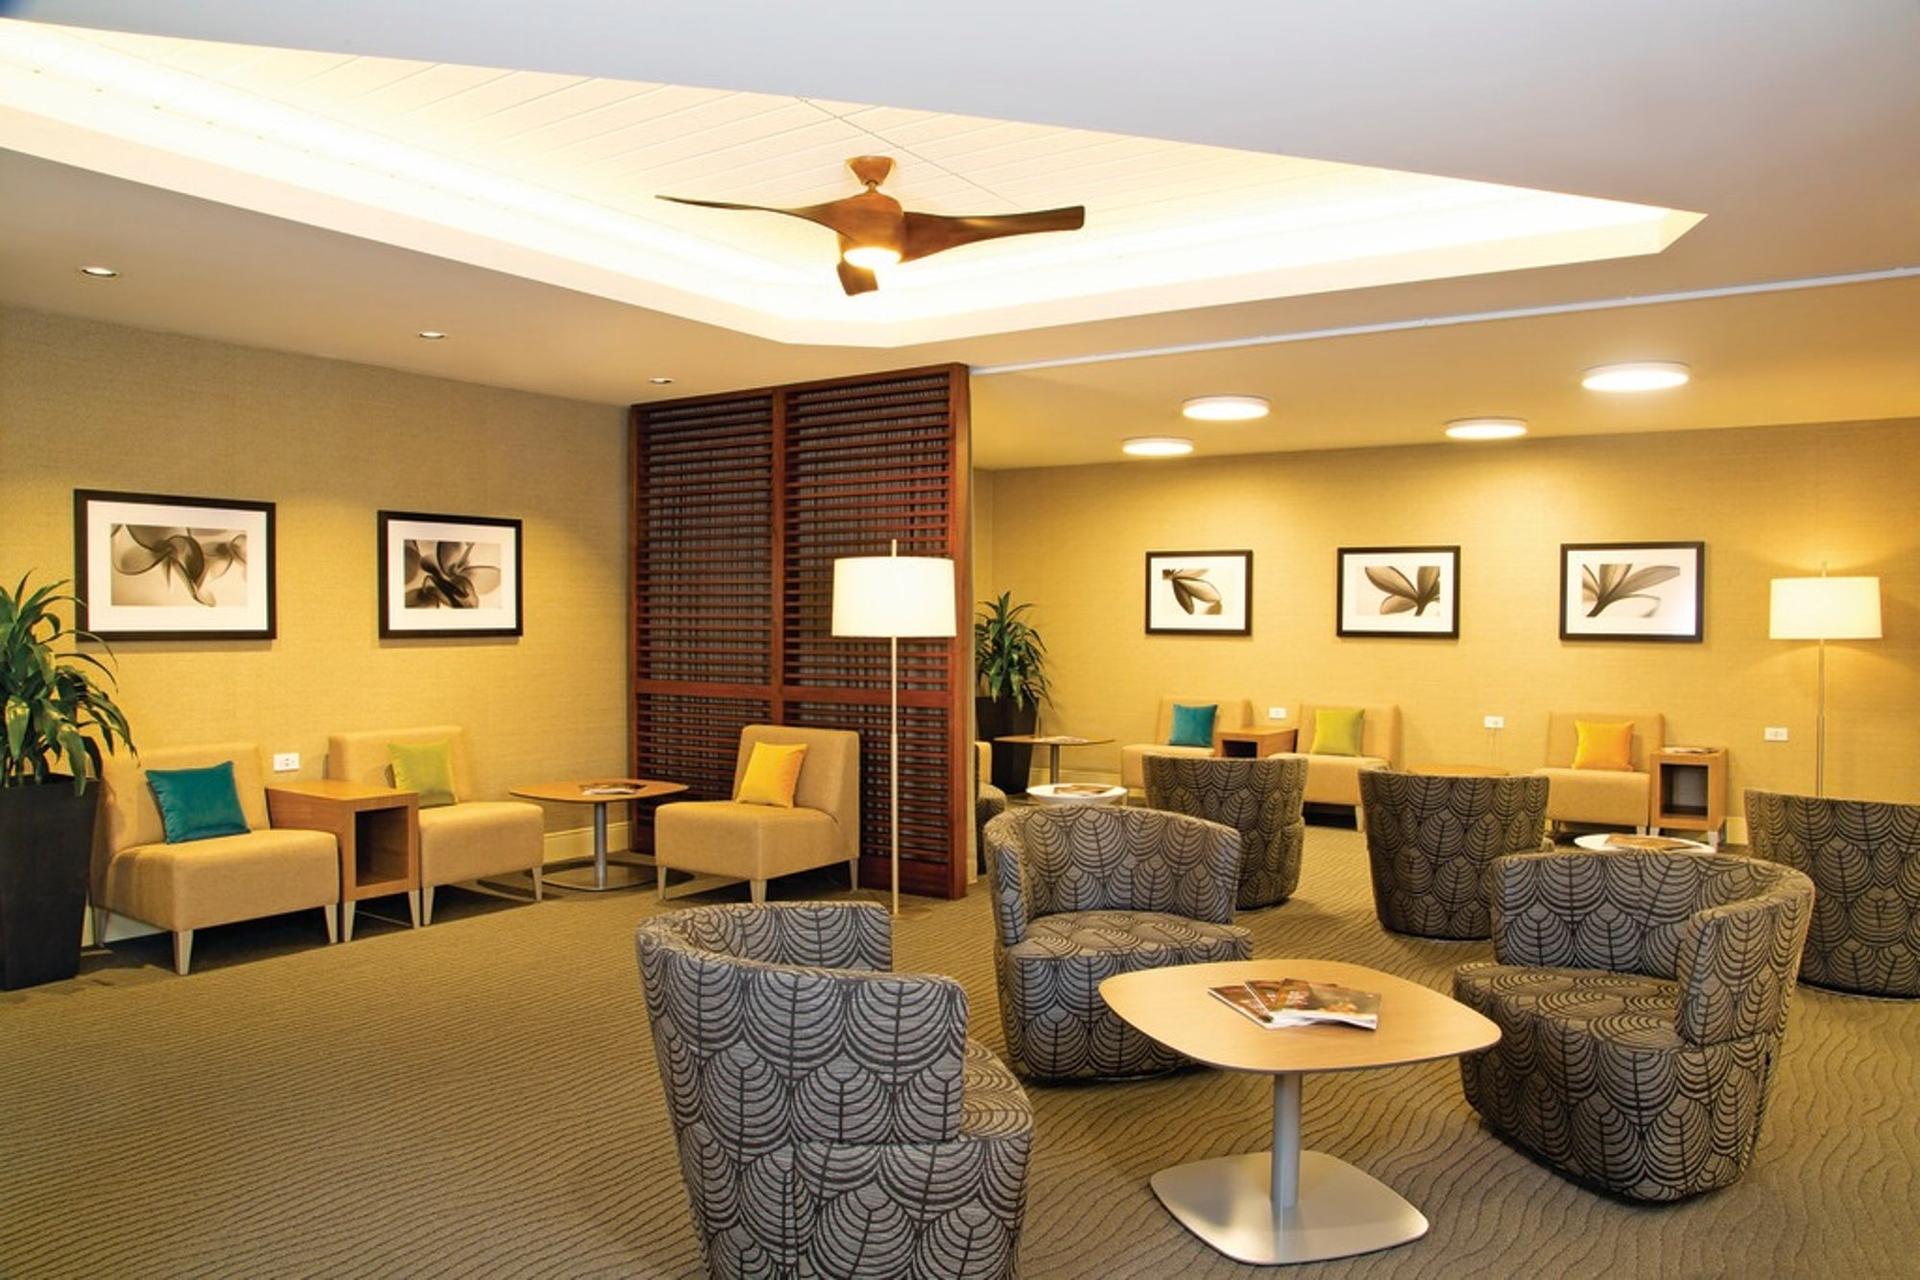 Hawaiian Airlines The Plumeria Lounge image 2 of 41